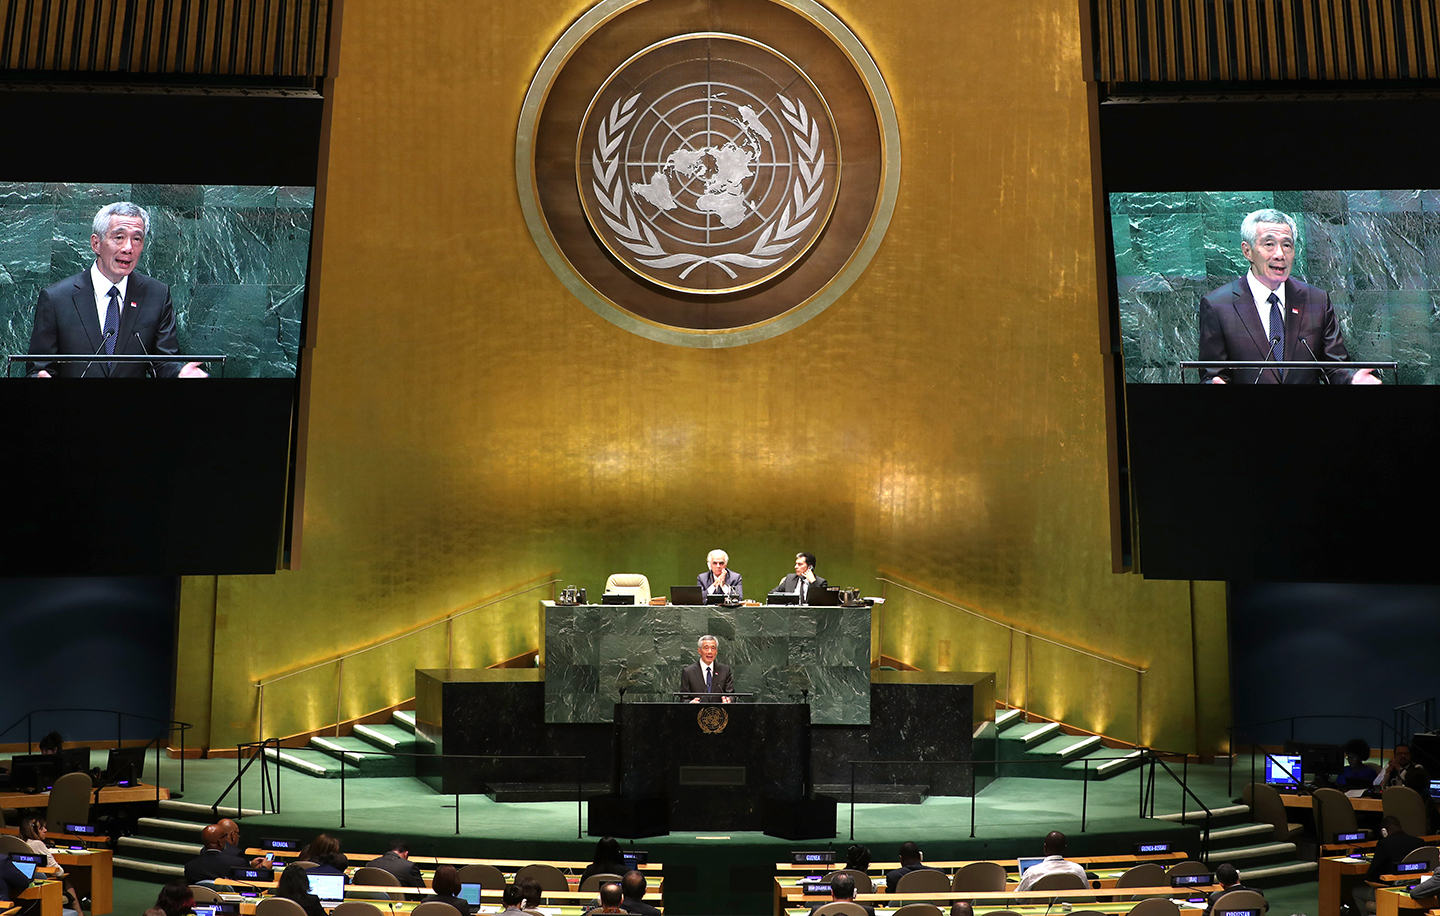 National Statement by PM Lee at the 74th Session of the UN General Assembly on 27 Sept 2019 (MCI Photo by Betty Chua)